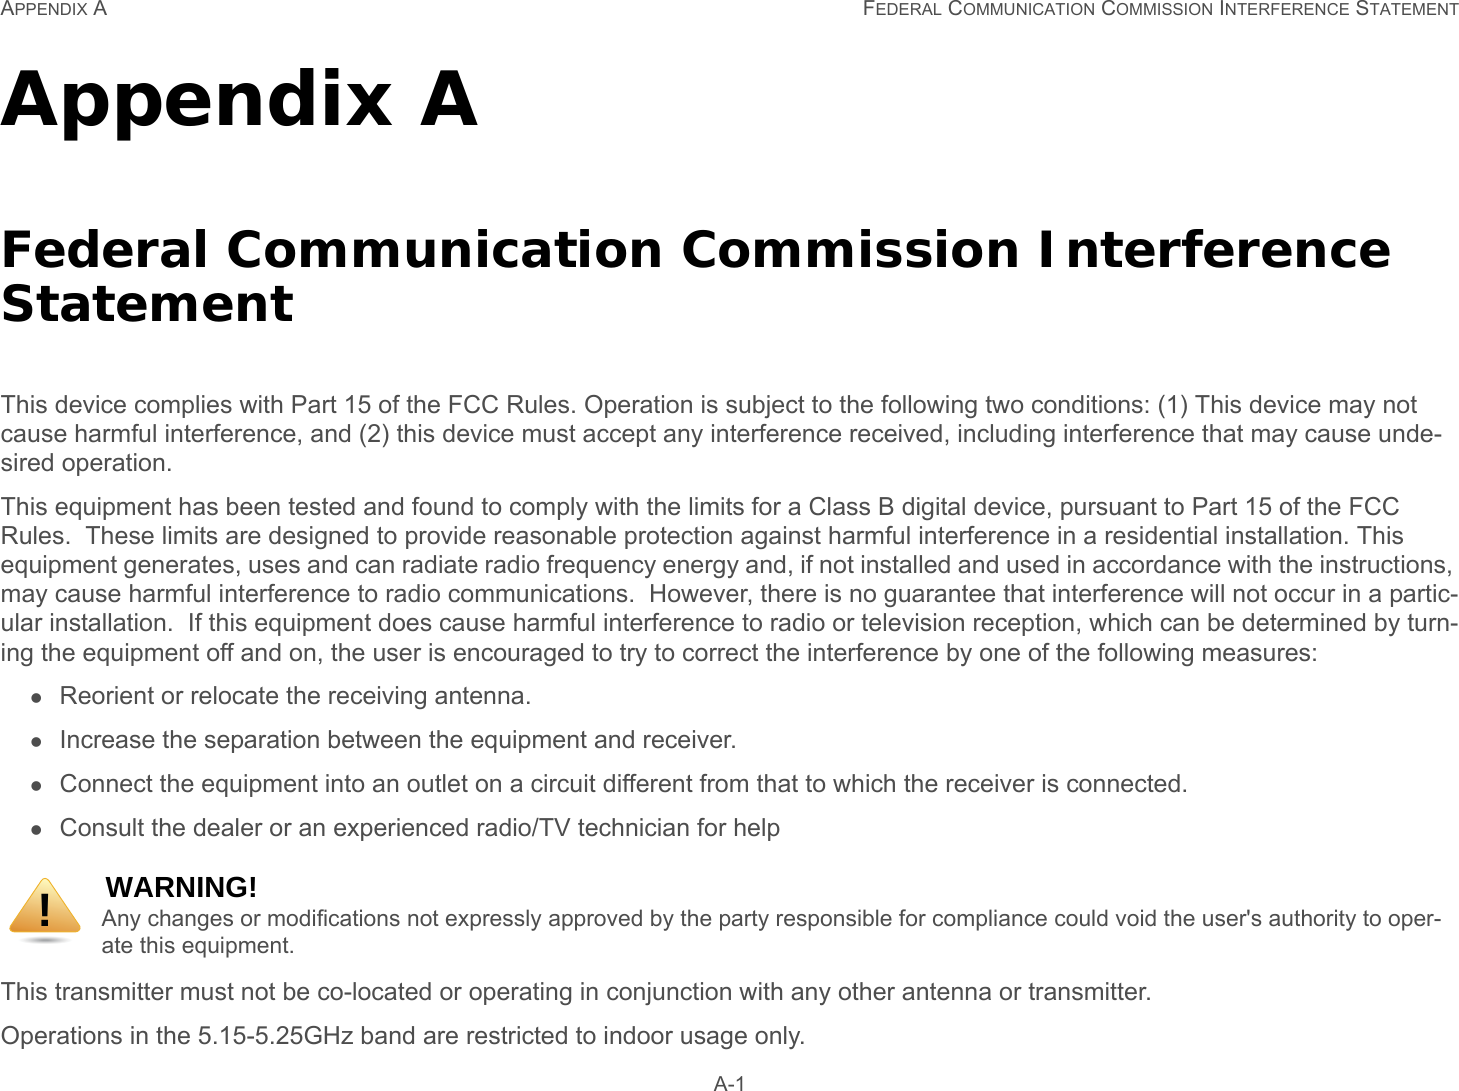 APPENDIX A FEDERAL COMMUNICATION COMMISSION INTERFERENCE STATEMENT A-1Appendix AFederal Communication Commission Interference StatementThis device complies with Part 15 of the FCC Rules. Operation is subject to the following two conditions: (1) This device may not cause harmful interference, and (2) this device must accept any interference received, including interference that may cause unde-sired operation.This equipment has been tested and found to comply with the limits for a Class B digital device, pursuant to Part 15 of the FCC Rules.  These limits are designed to provide reasonable protection against harmful interference in a residential installation. This equipment generates, uses and can radiate radio frequency energy and, if not installed and used in accordance with the instructions, may cause harmful interference to radio communications.  However, there is no guarantee that interference will not occur in a partic-ular installation.  If this equipment does cause harmful interference to radio or television reception, which can be determined by turn-ing the equipment off and on, the user is encouraged to try to correct the interference by one of the following measures:Reorient or relocate the receiving antenna.Increase the separation between the equipment and receiver.Connect the equipment into an outlet on a circuit different from that to which the receiver is connected.Consult the dealer or an experienced radio/TV technician for helpThis transmitter must not be co-located or operating in conjunction with any other antenna or transmitter. Operations in the 5.15-5.25GHz band are restricted to indoor usage only. WARNING!Any changes or modifications not expressly approved by the party responsible for compliance could void the user&apos;s authority to oper-ate this equipment.!